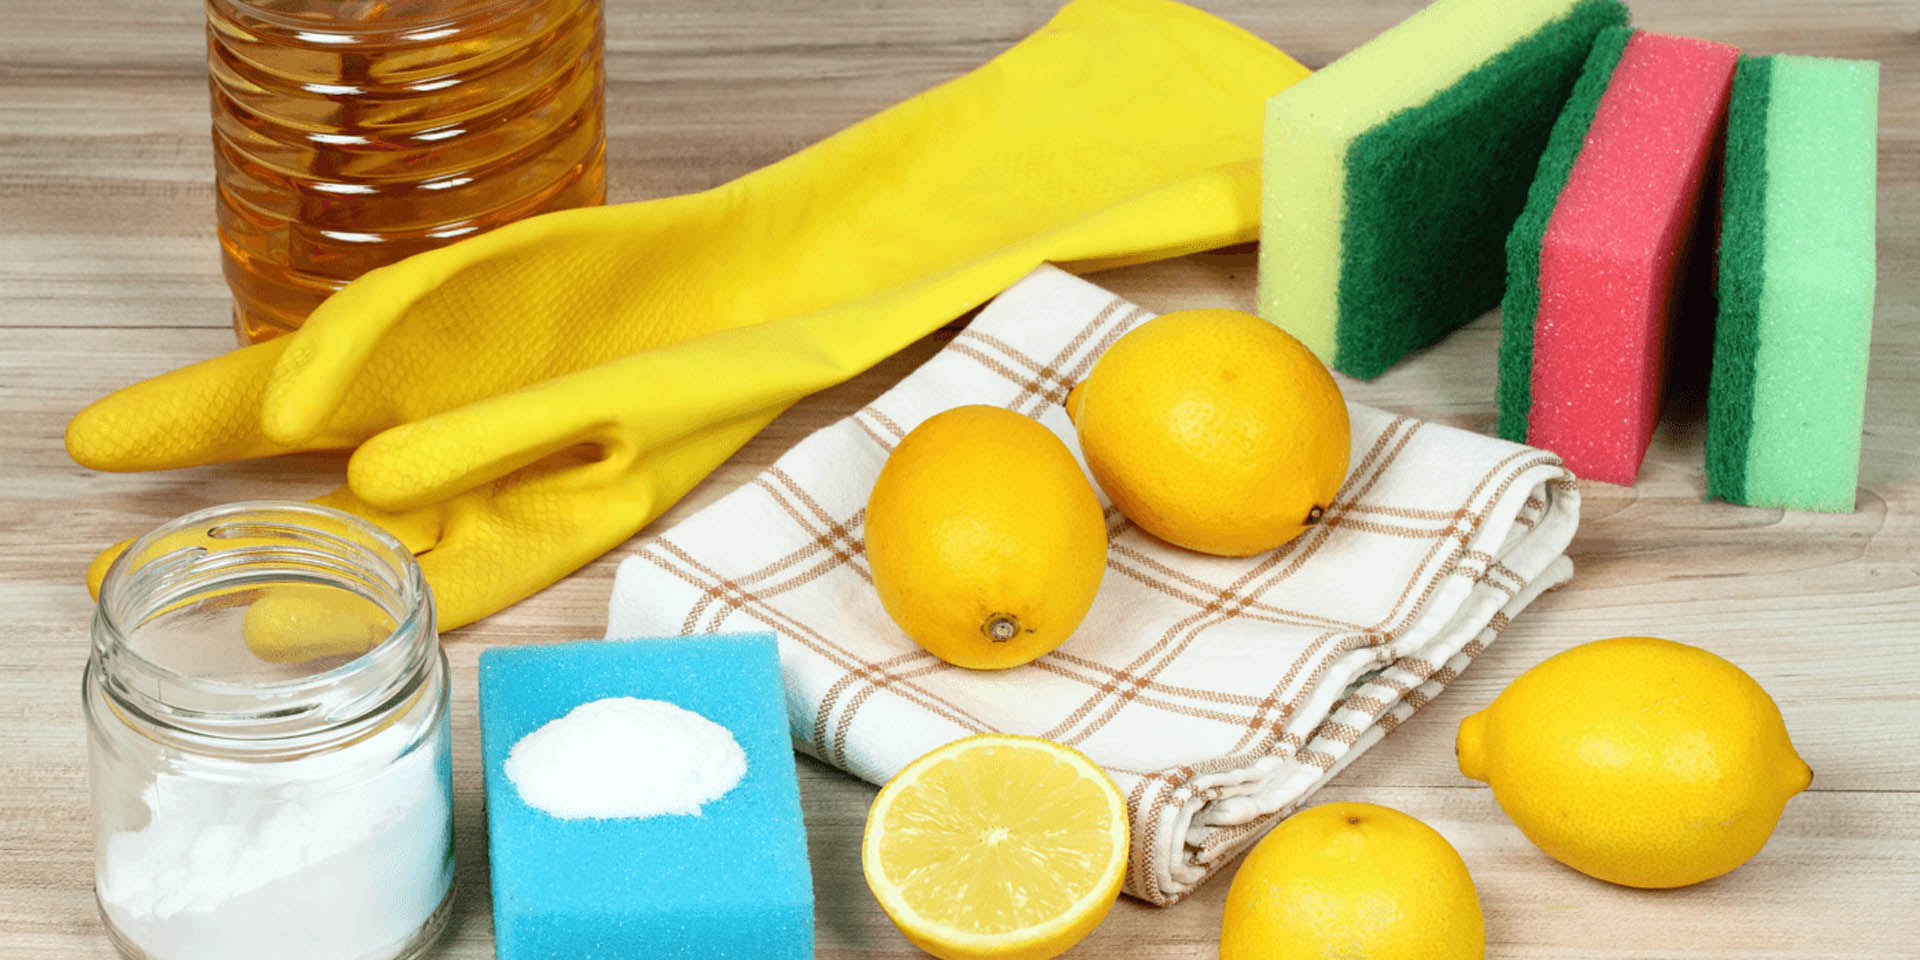 ingredients-need-keep-naturally-clean-home-products-featured-image